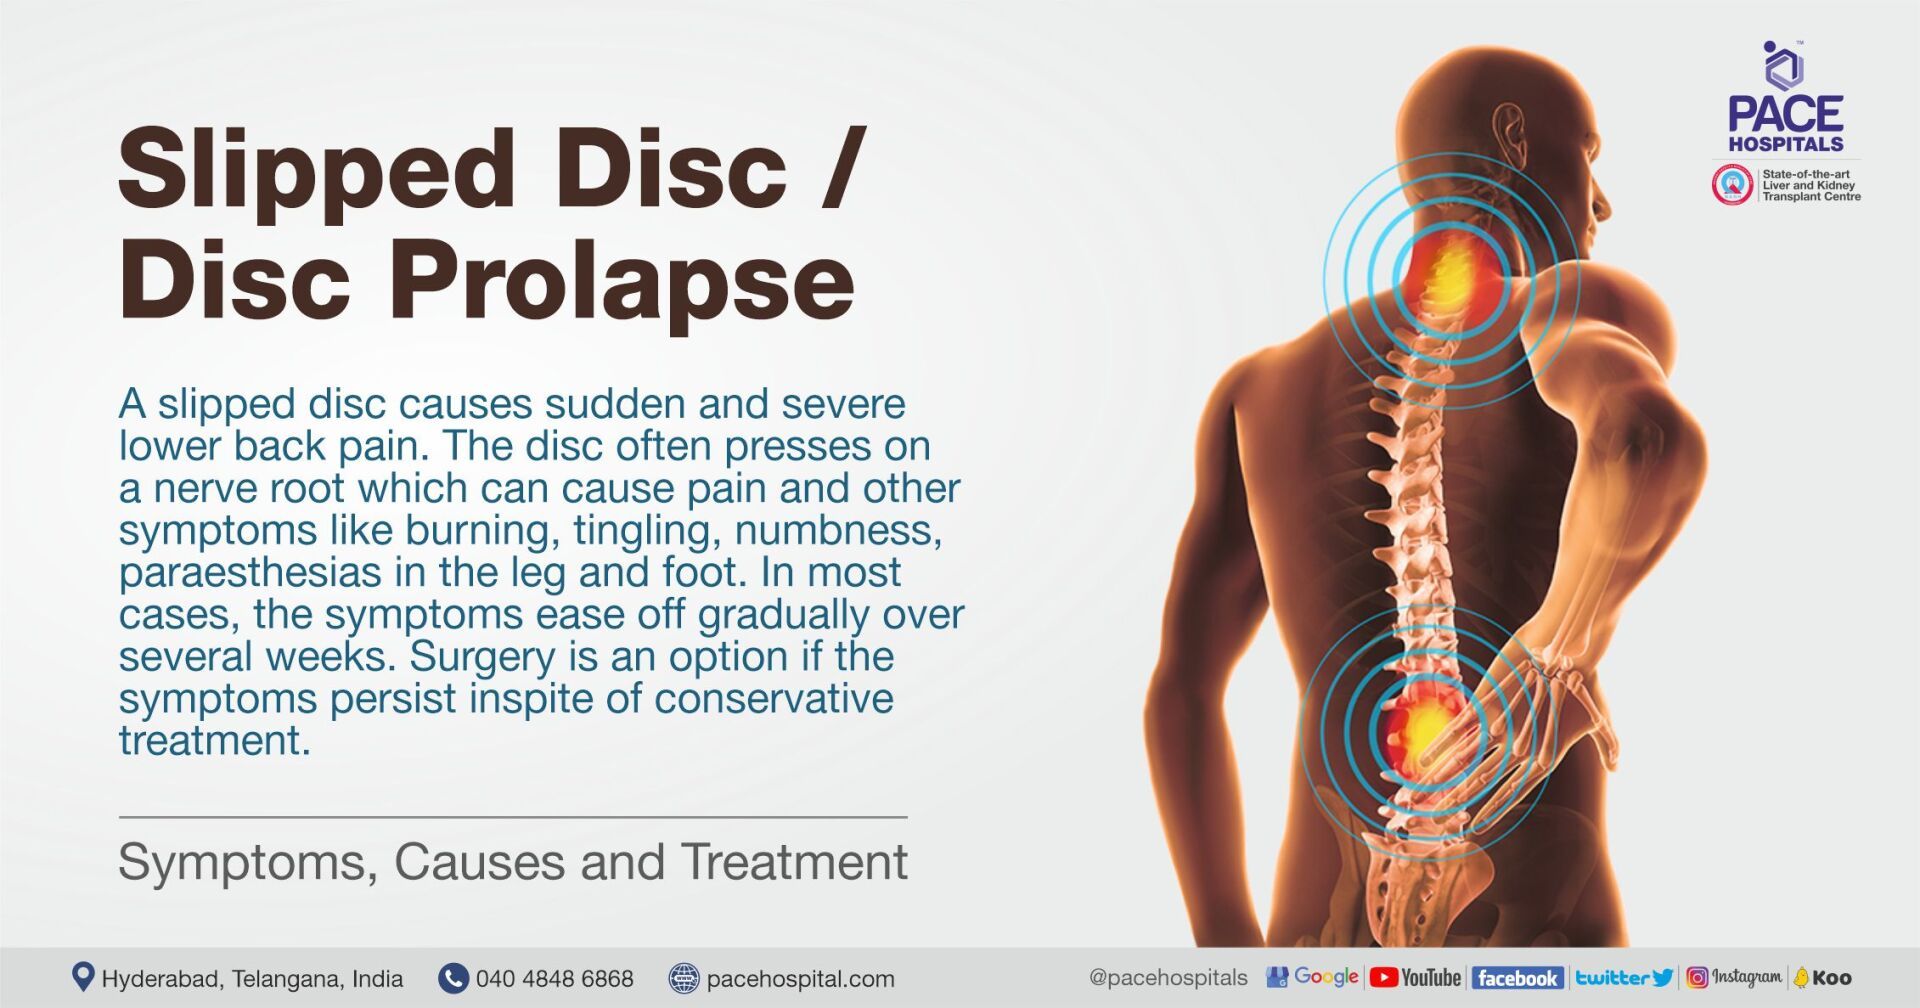 Herniated Disc: What are your Options?